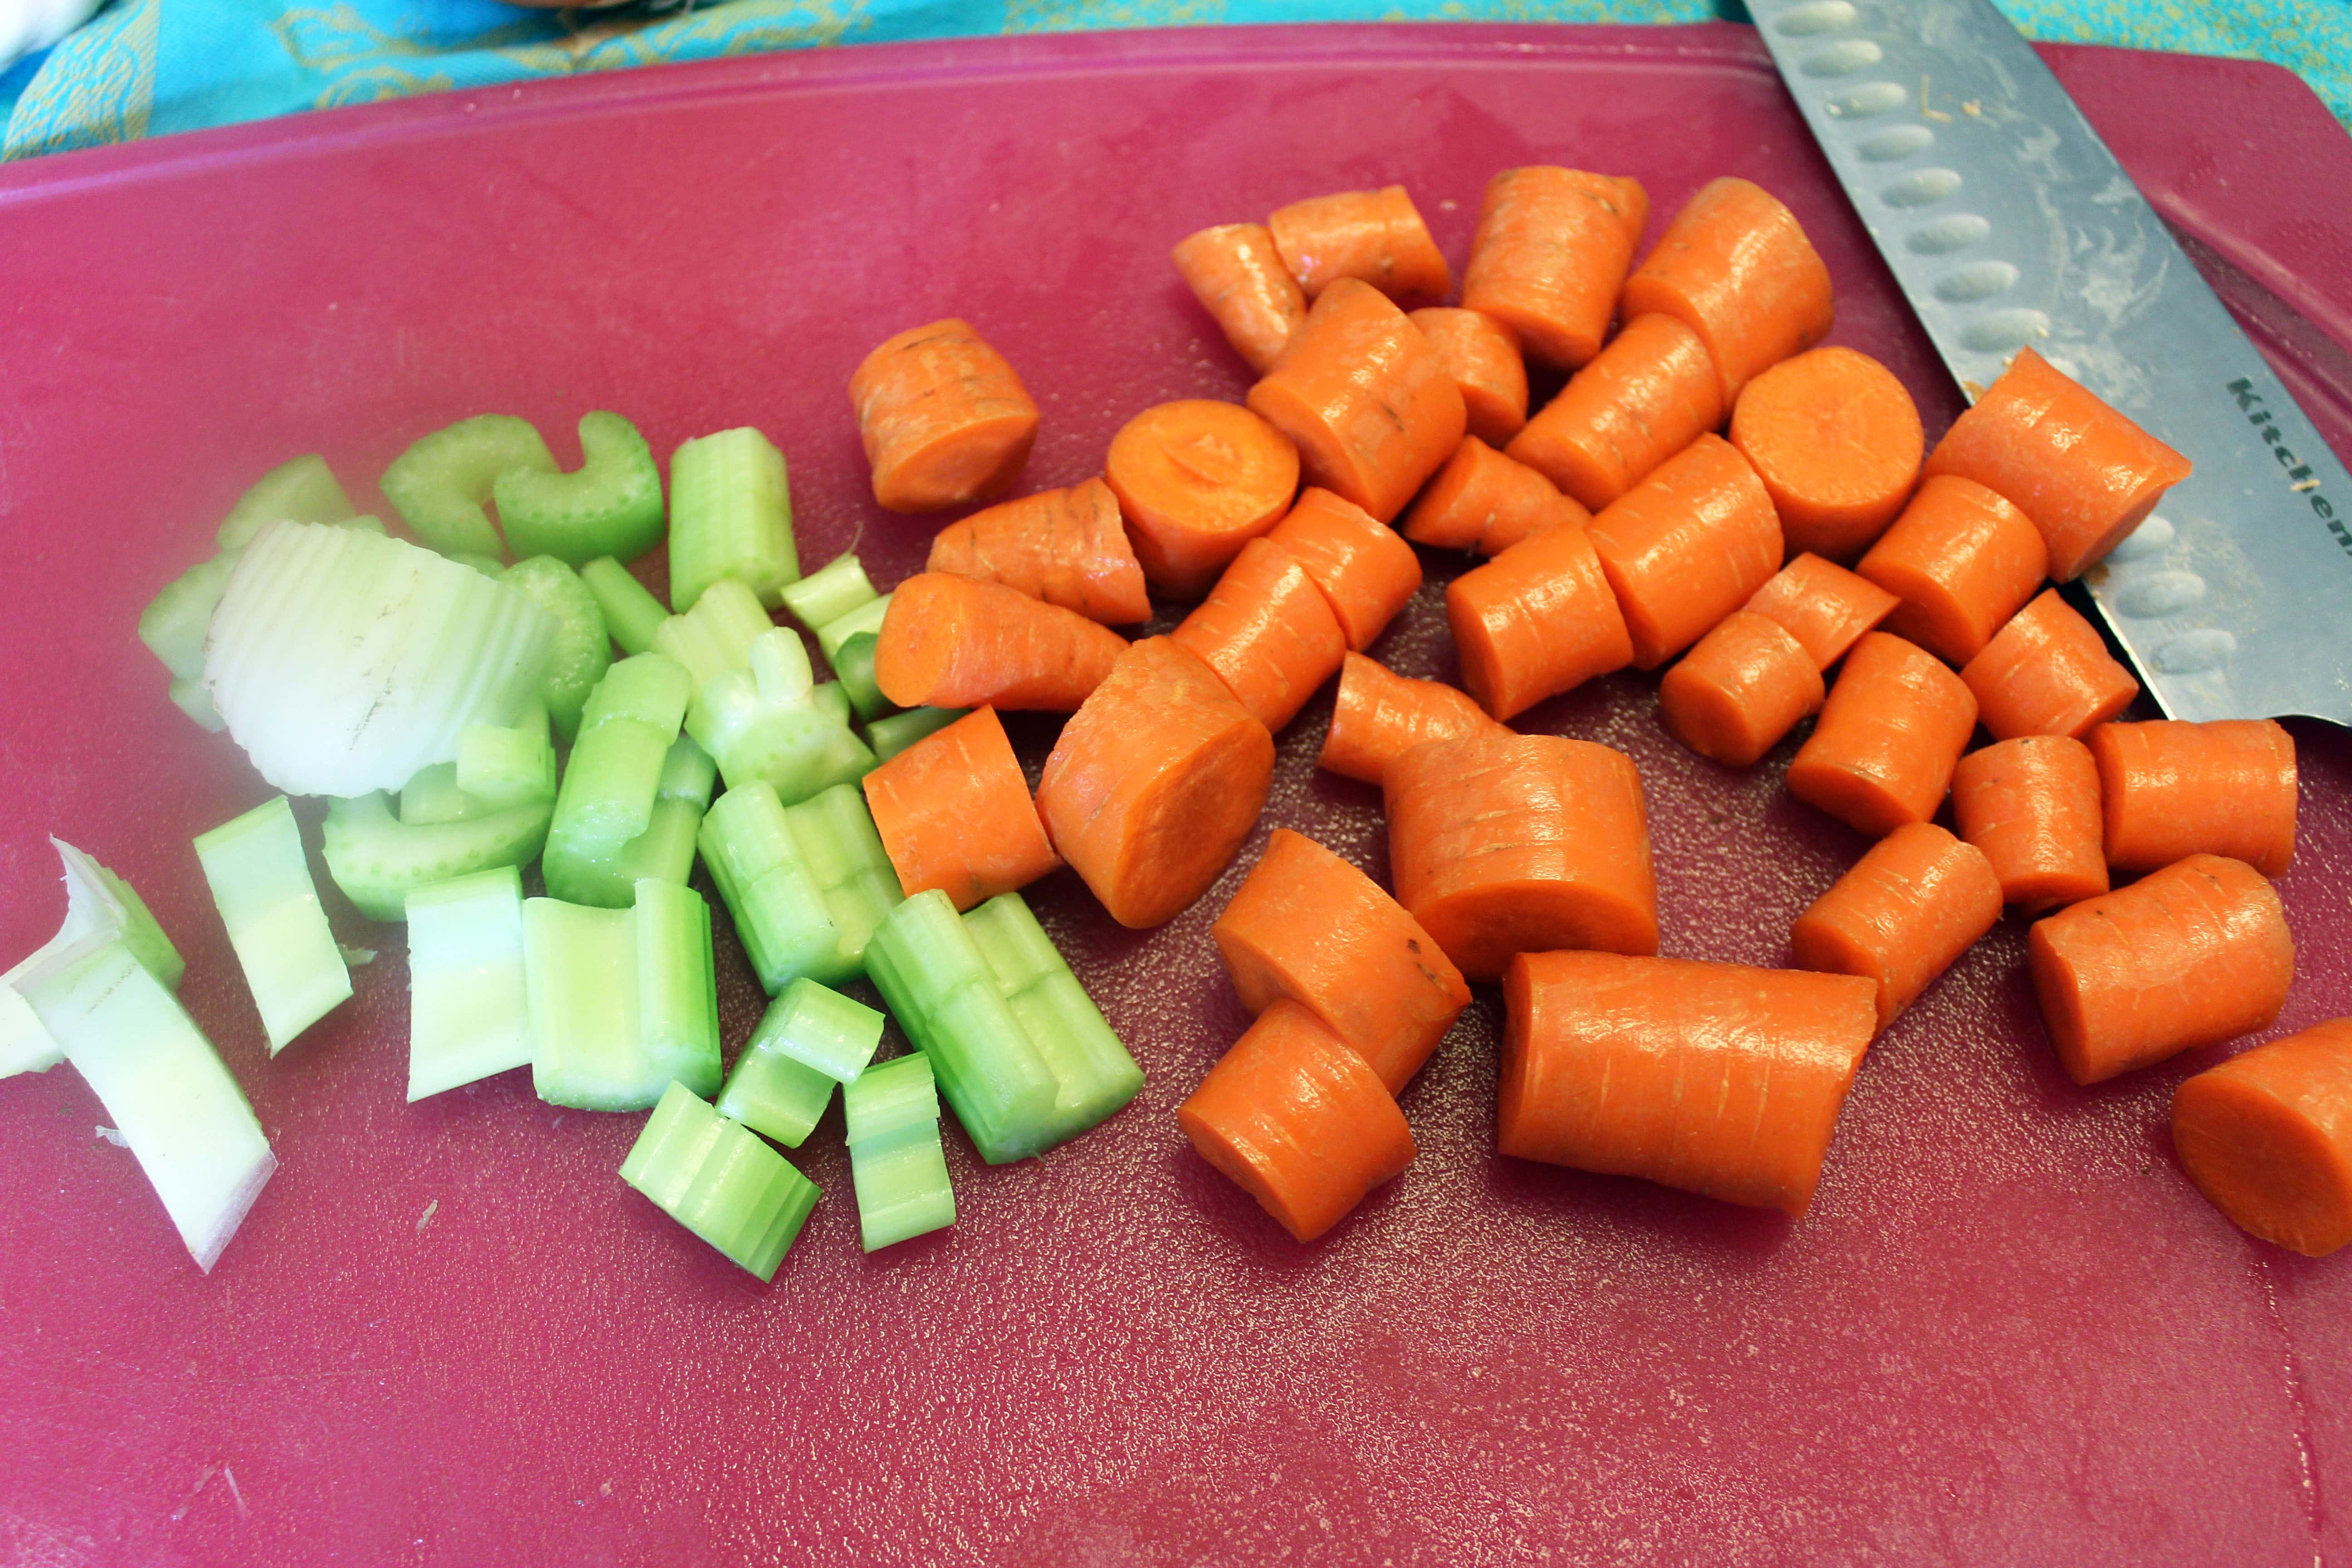 Make large chunks of celery and carrot